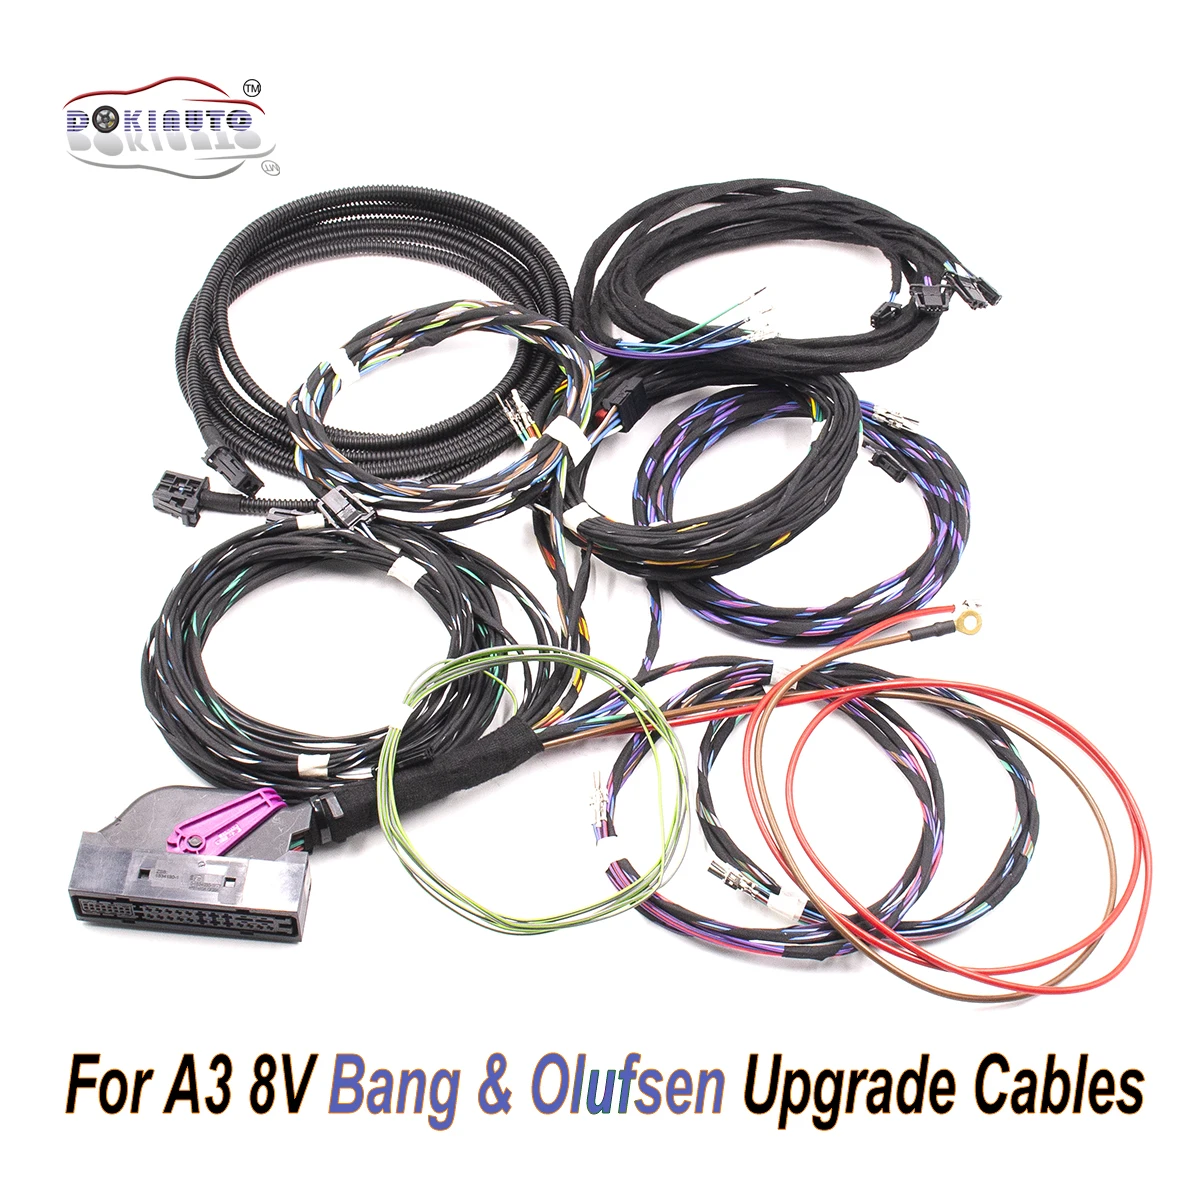 

Upgrade Adapter Cable Wiring Harness Cable USE FIT For Audi A3 8V Bang & Olufsen Audio Speakers Media B&O System